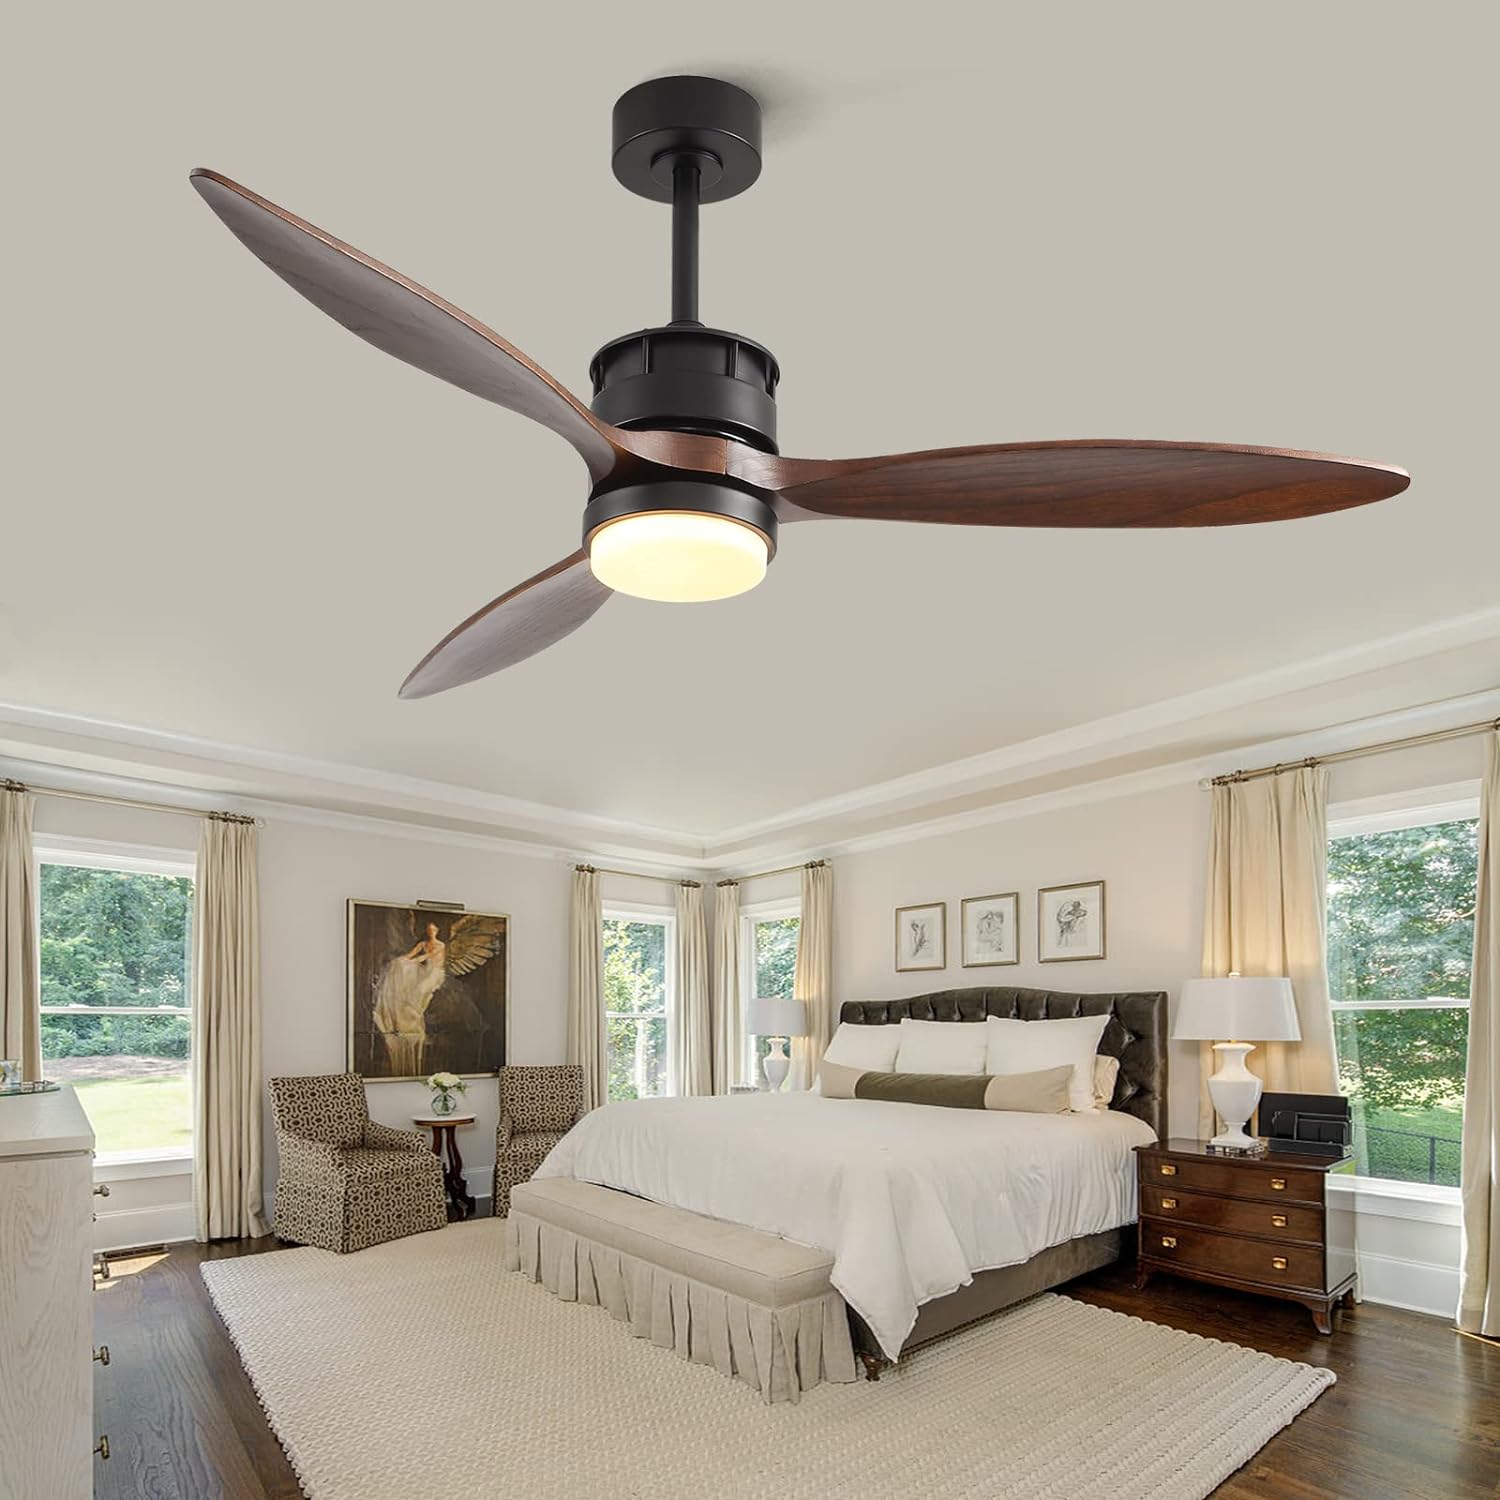 BOJUE Ceiling Fans with Lights, 52 Indoor Outdoor, 3 Wooden Blades, Remote Control, Noiseless Reversible DC Motor, Suitable for Terrace/Living Room/Bedroom/Study